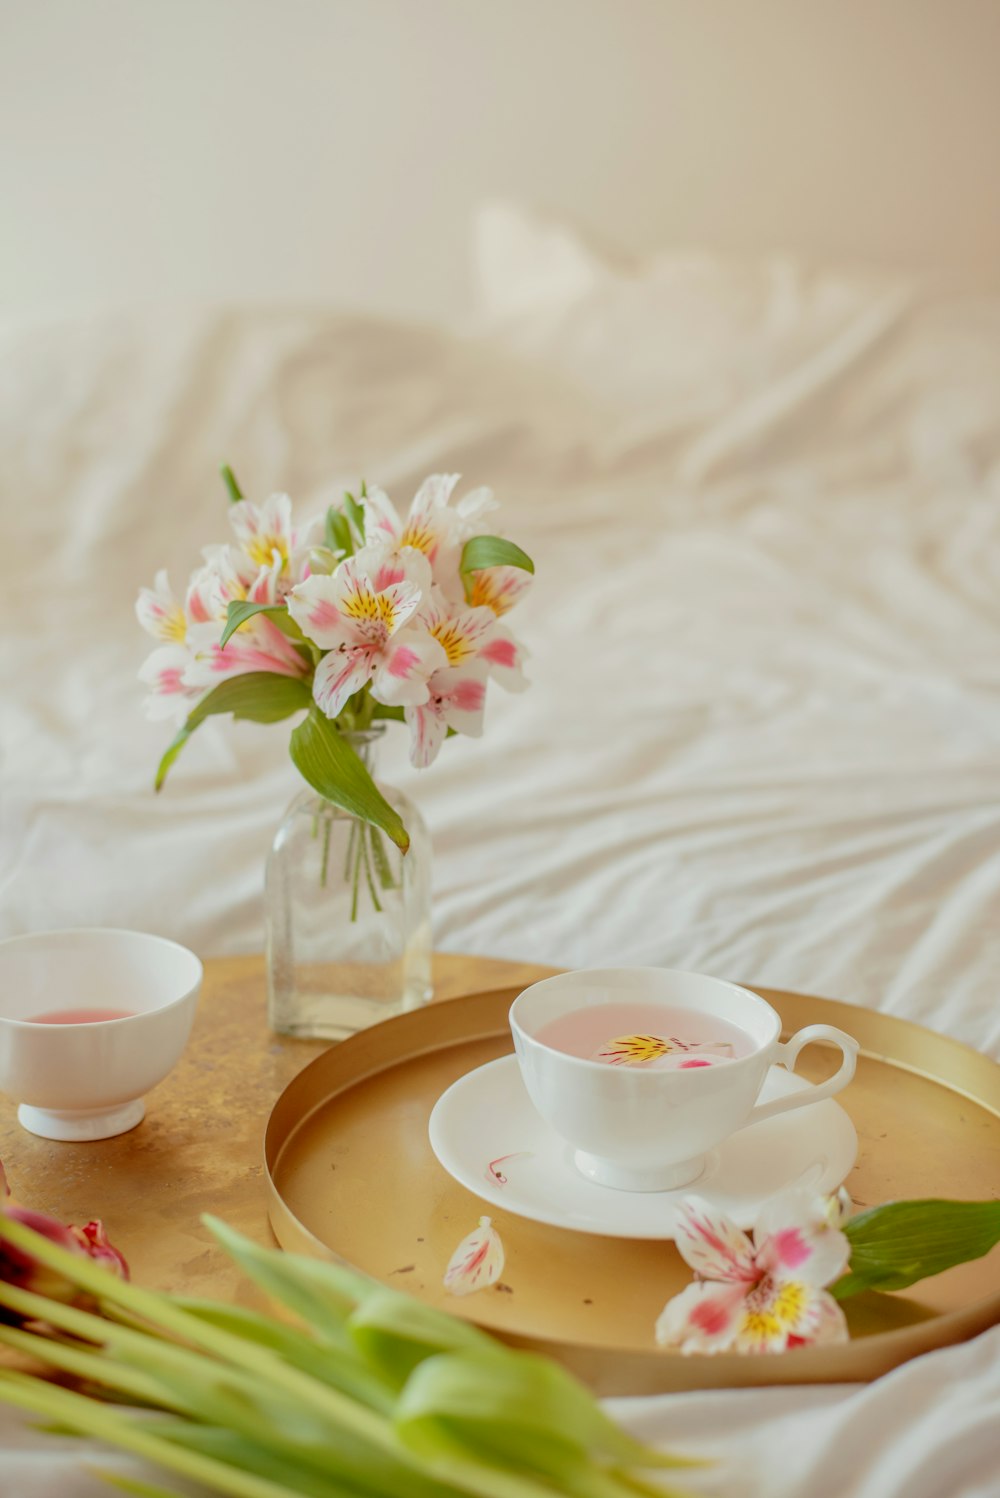 a tray with a cup and saucer and a vase with flowers